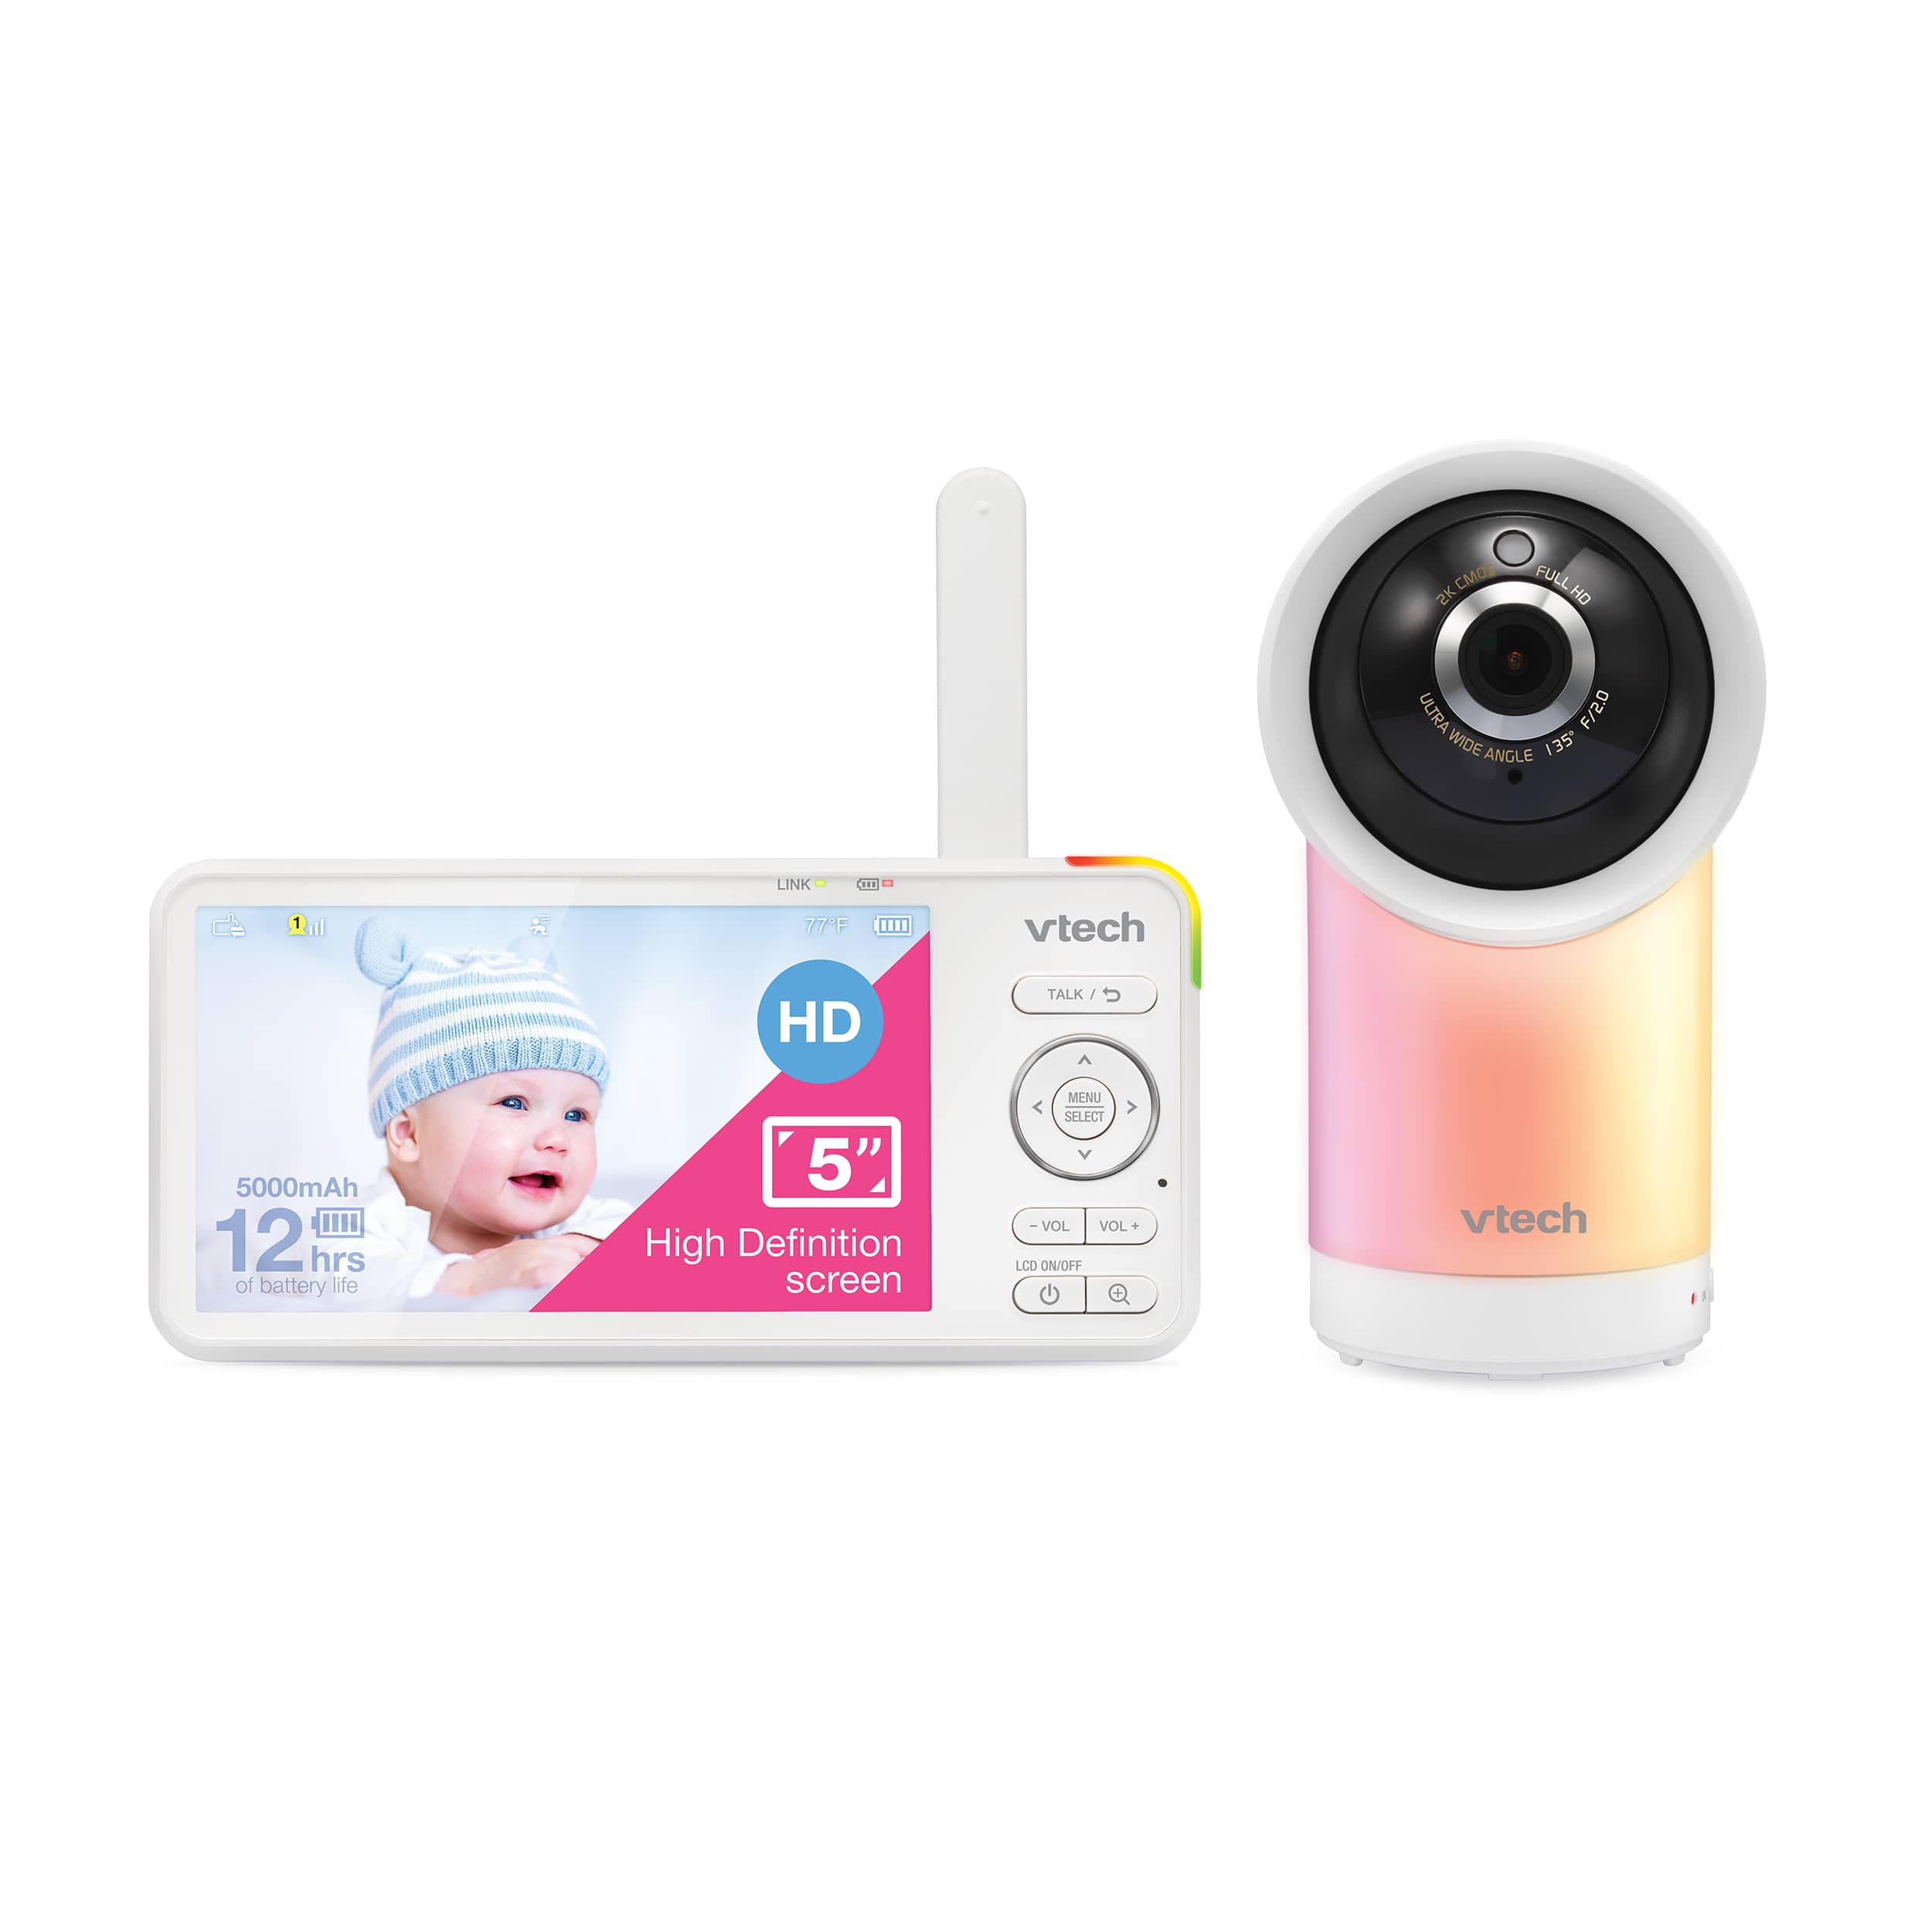 utilfredsstillende Risikabel ring 1080p Smart WiFi Remote Access 360 Degree Pan & Tilt Video Baby Monitor  with 5" High Definition 720p Display, Night Light